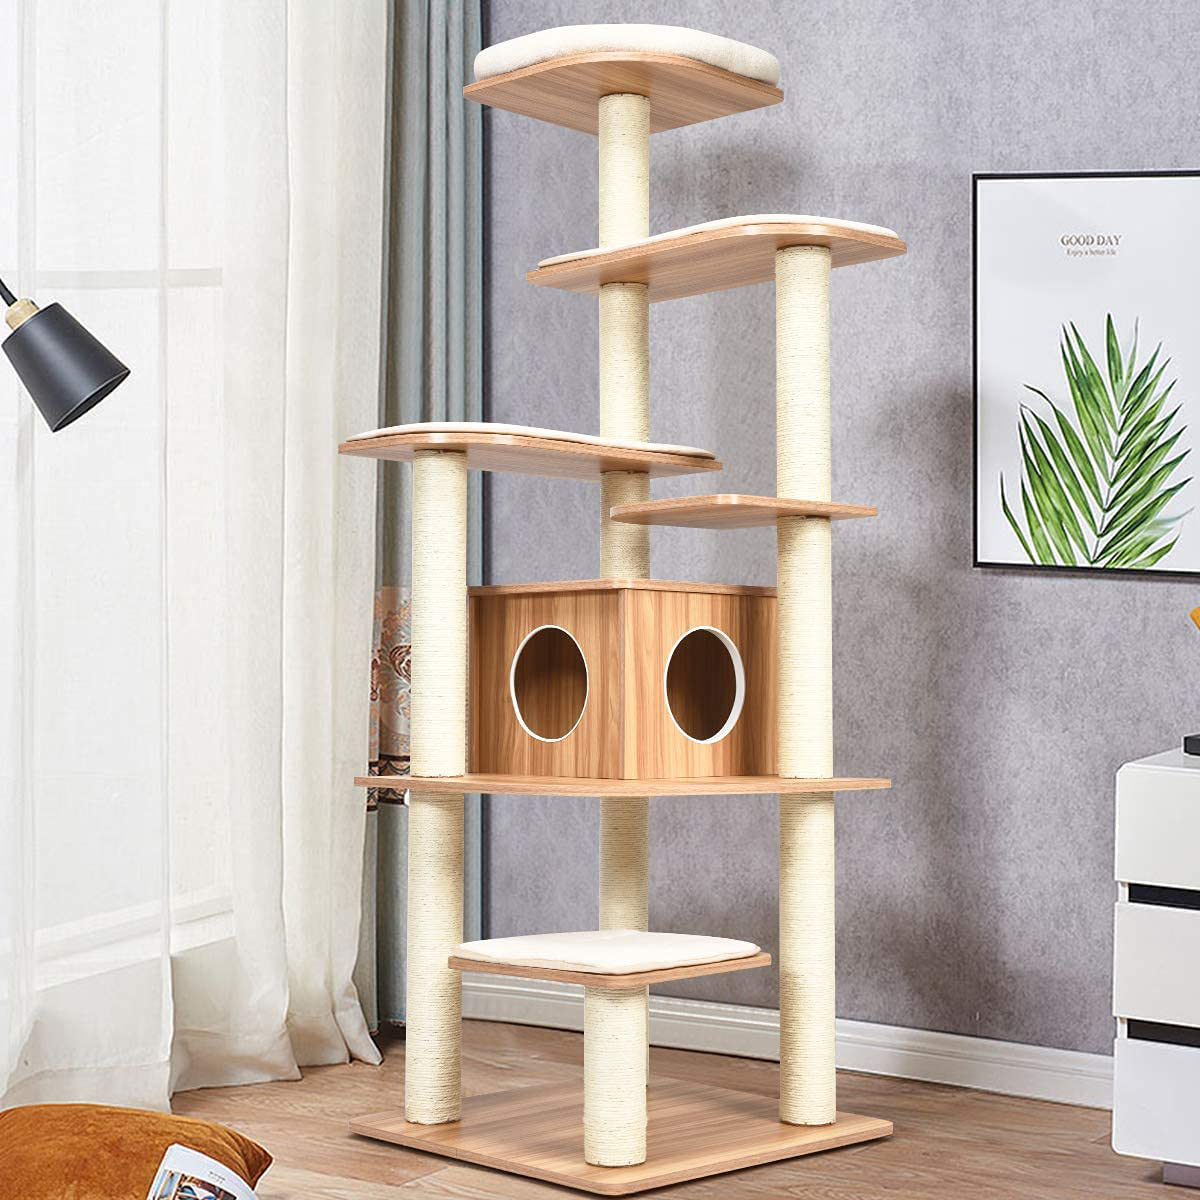 Tangkula Modern Wood Cat Tree, 69-Inch Cat Tower with Multi-Layer Platform, Cat Activity Tree with Sisal Rope Scratching Posts, Cat Condo Furniture W/Washable Plush Cushions for Large Cats Kittens